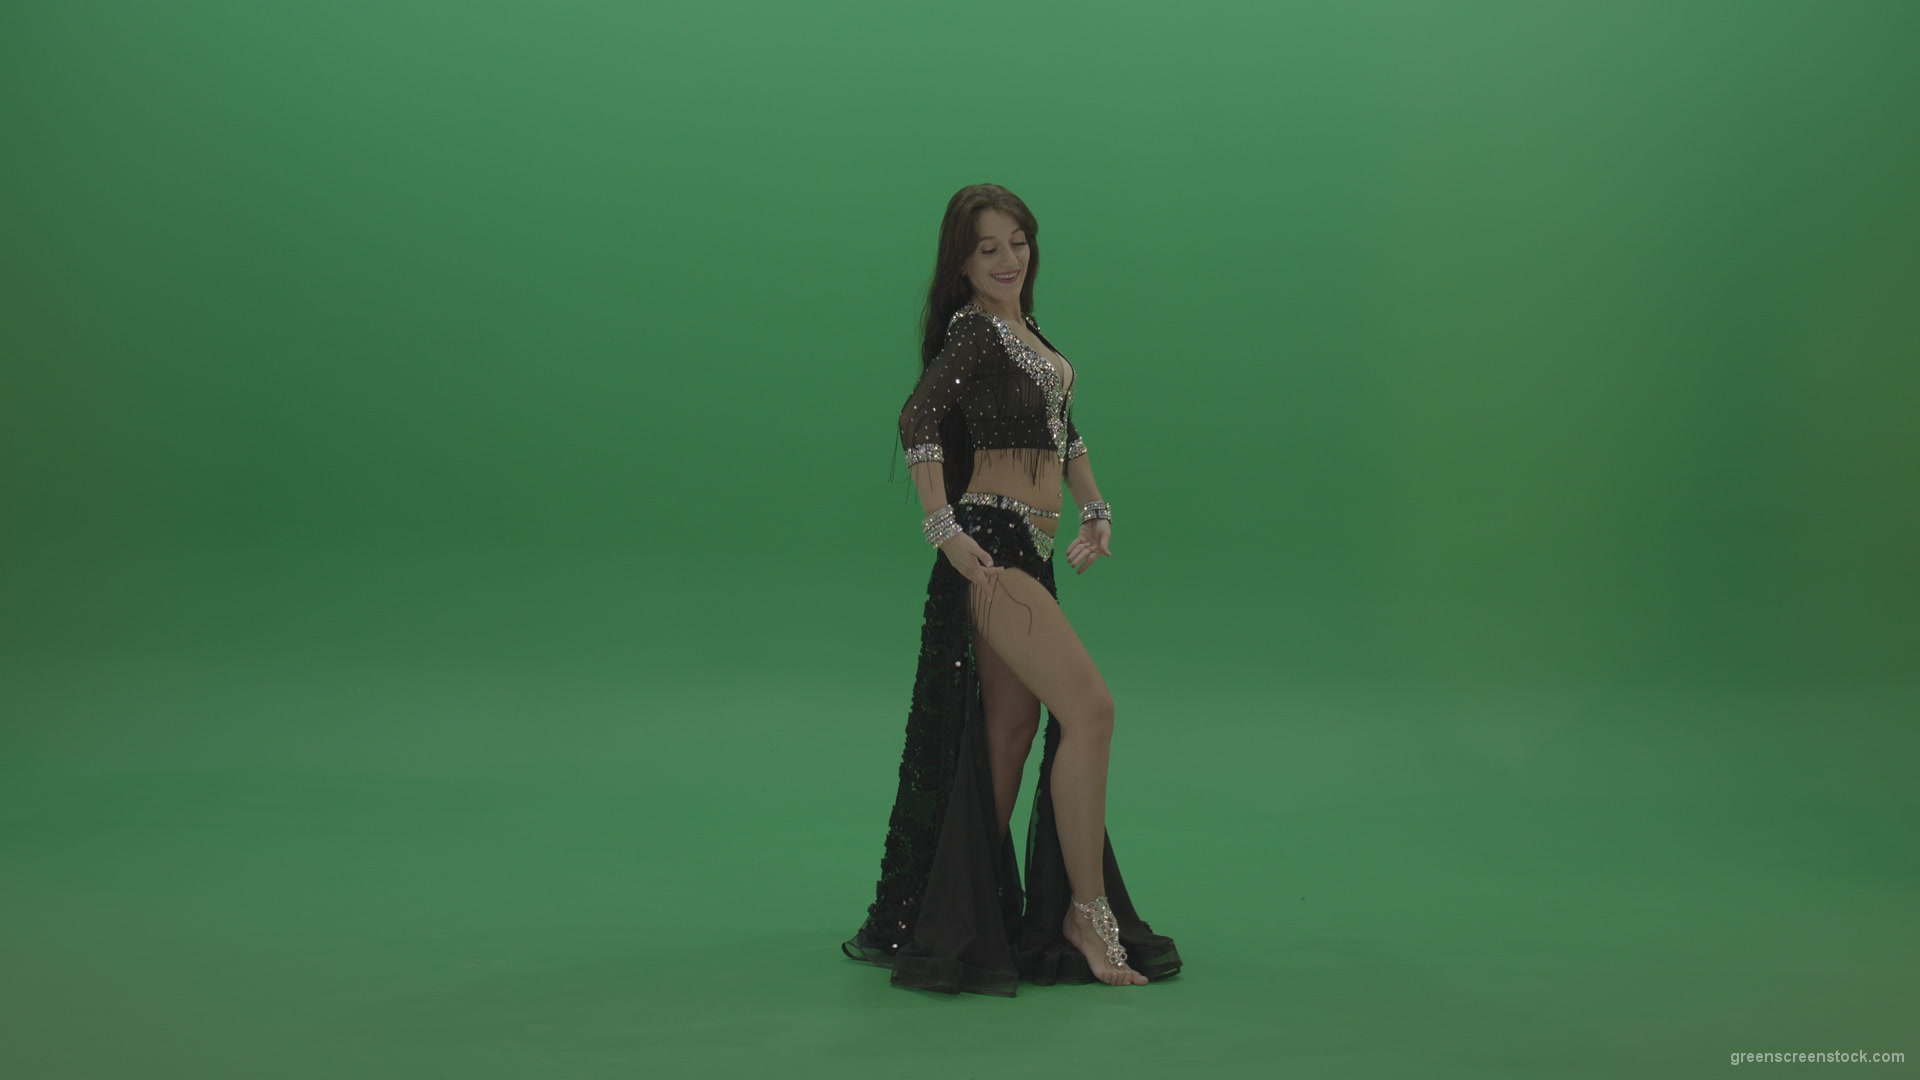 Gorgeous-belly-dancer-in-black-wear-display-amazing-dance-moves-over-chromakey-background_002 Green Screen Stock